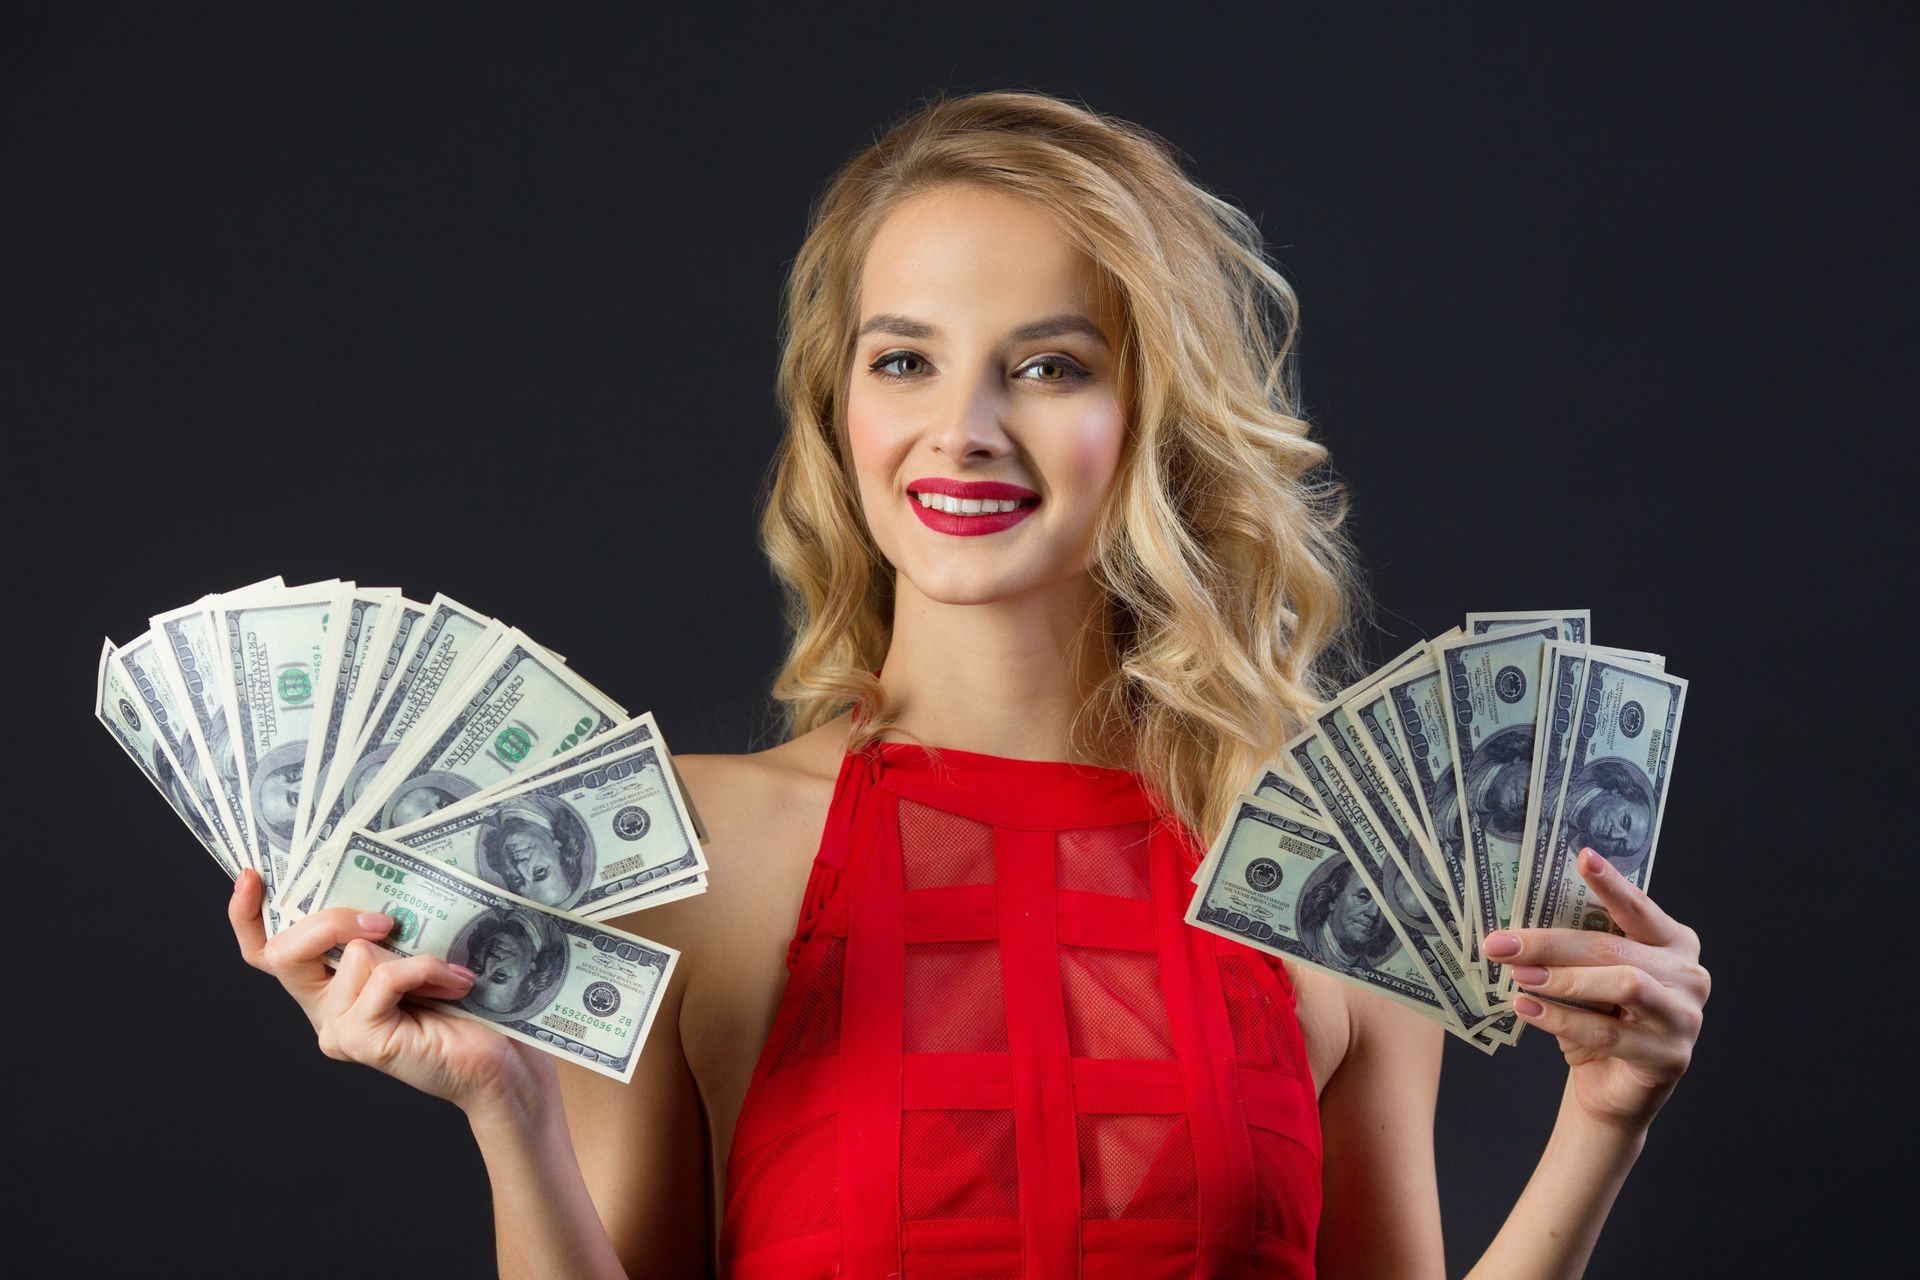 beautiful young girl with hairstyle and makeup in a red dress holding dollars in her hands